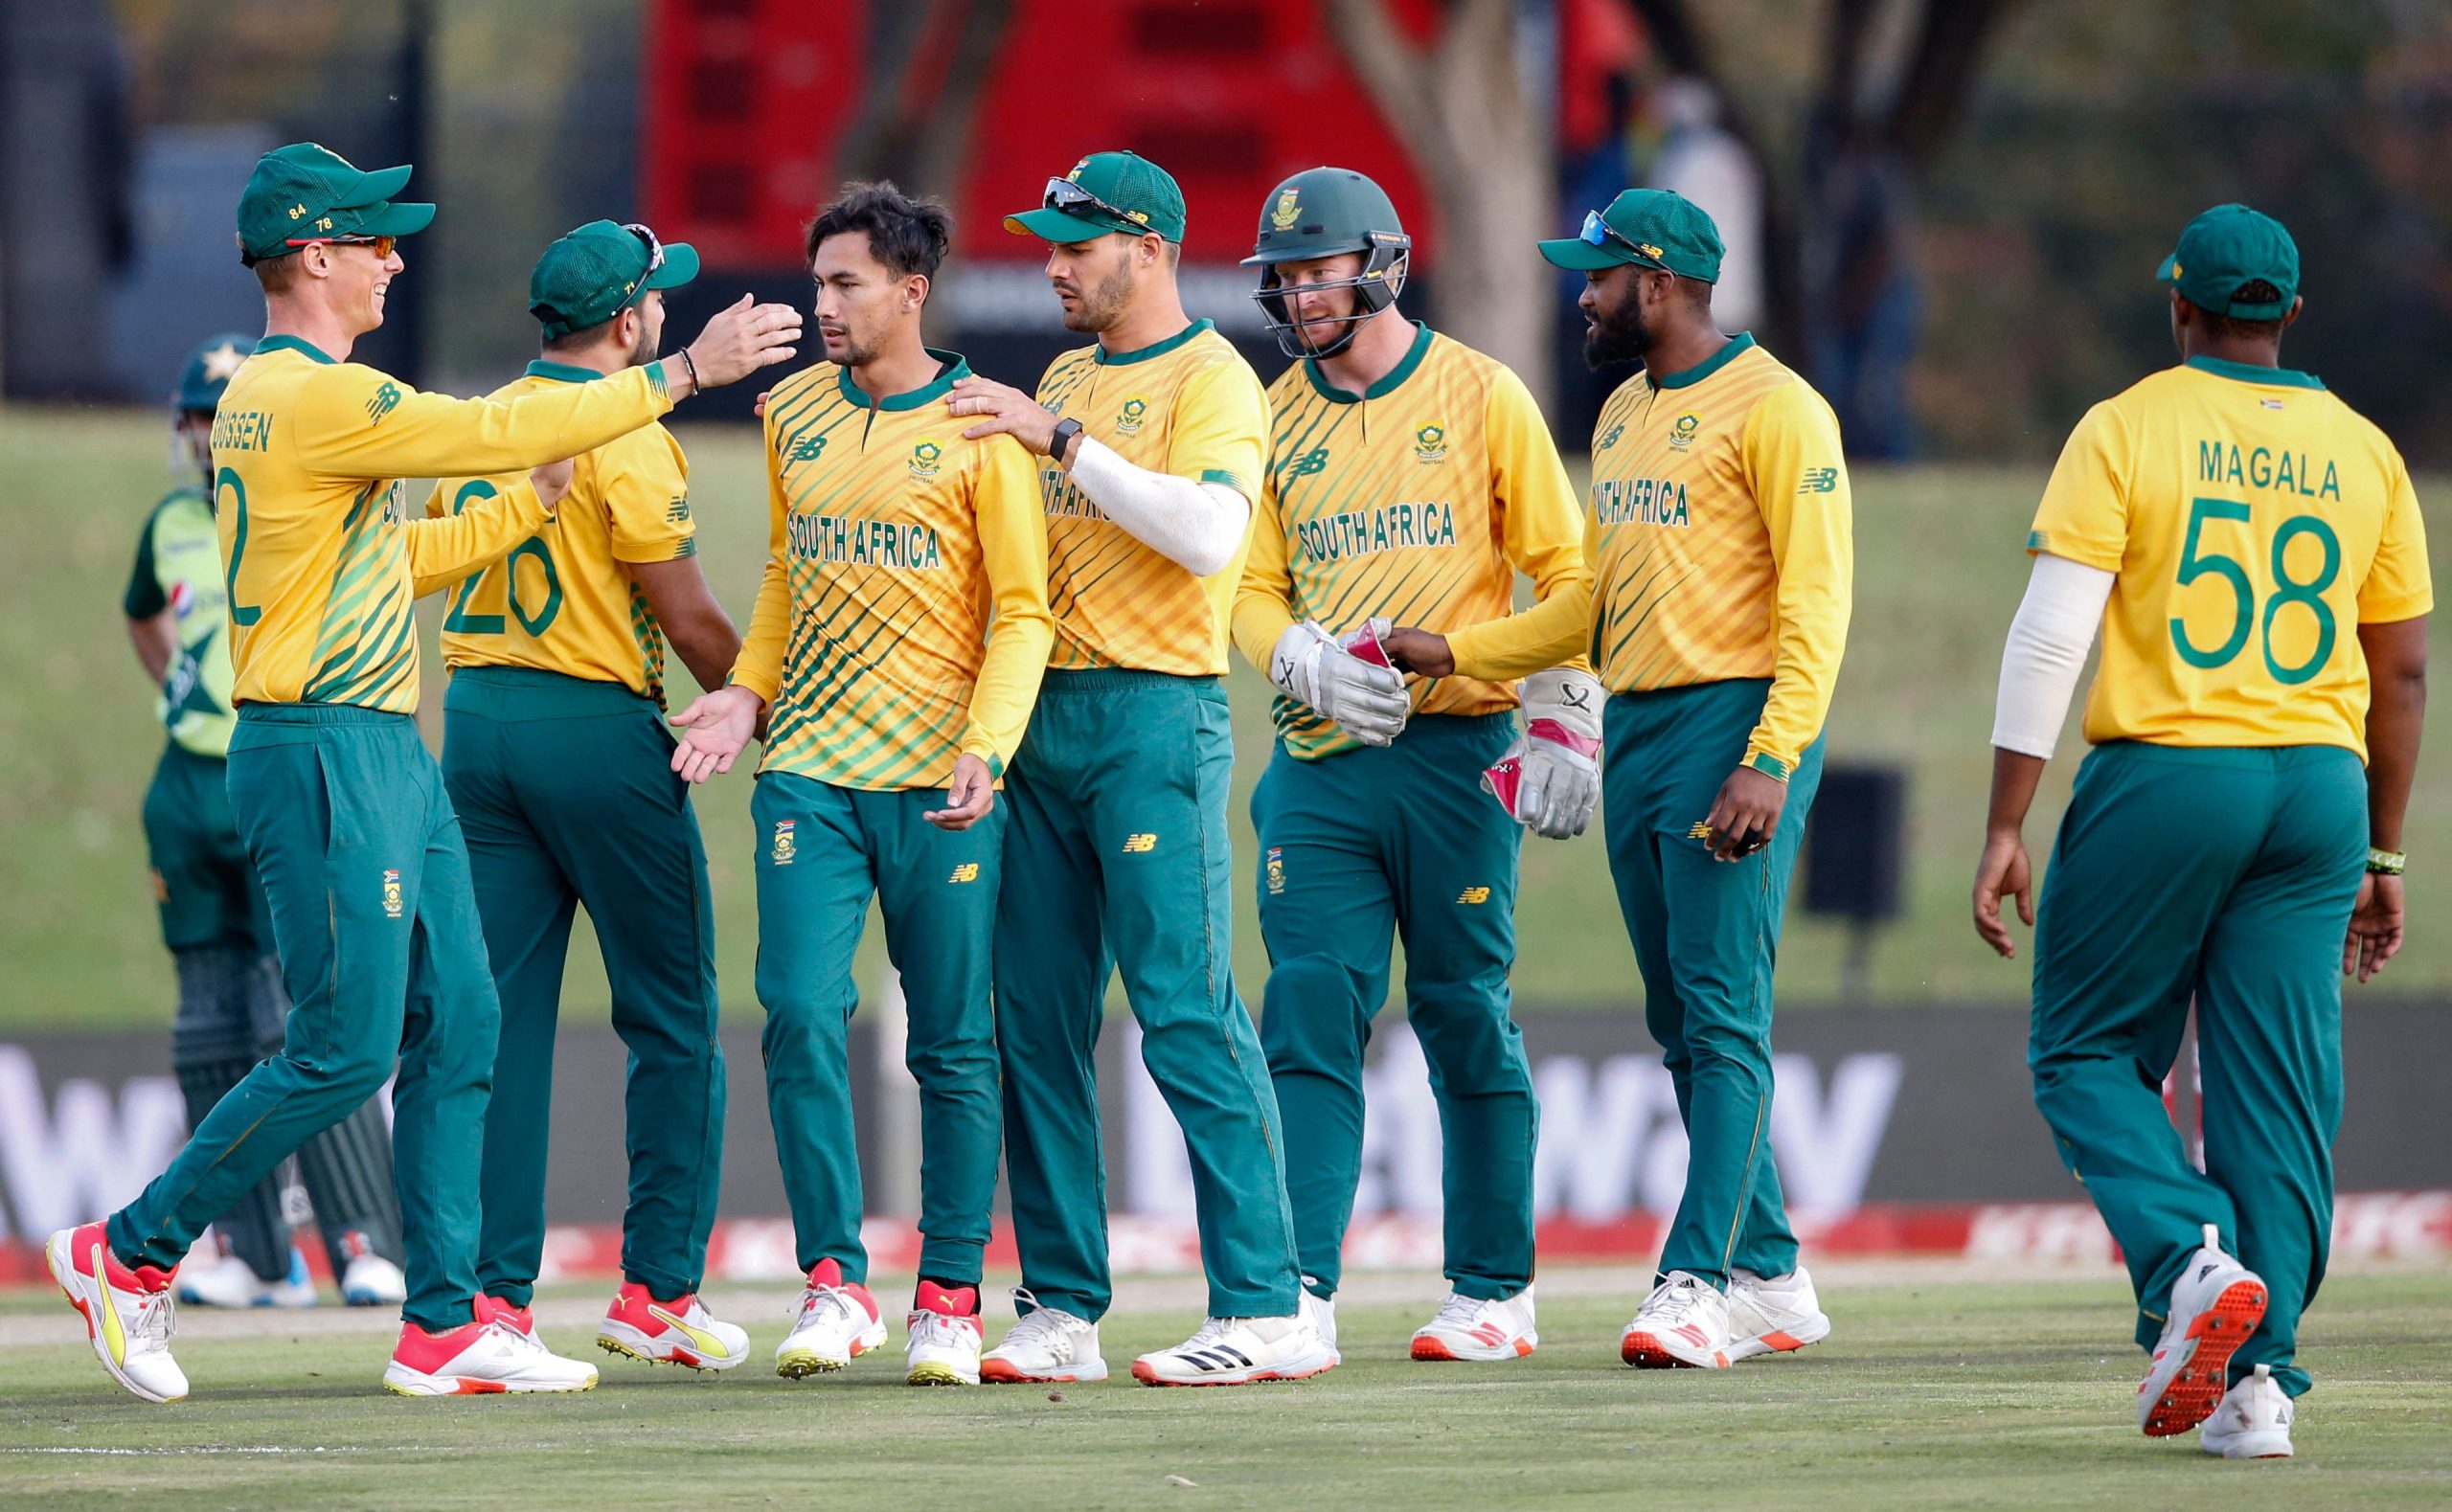 SouthAfrica ICC WORLD T20 Squad Released